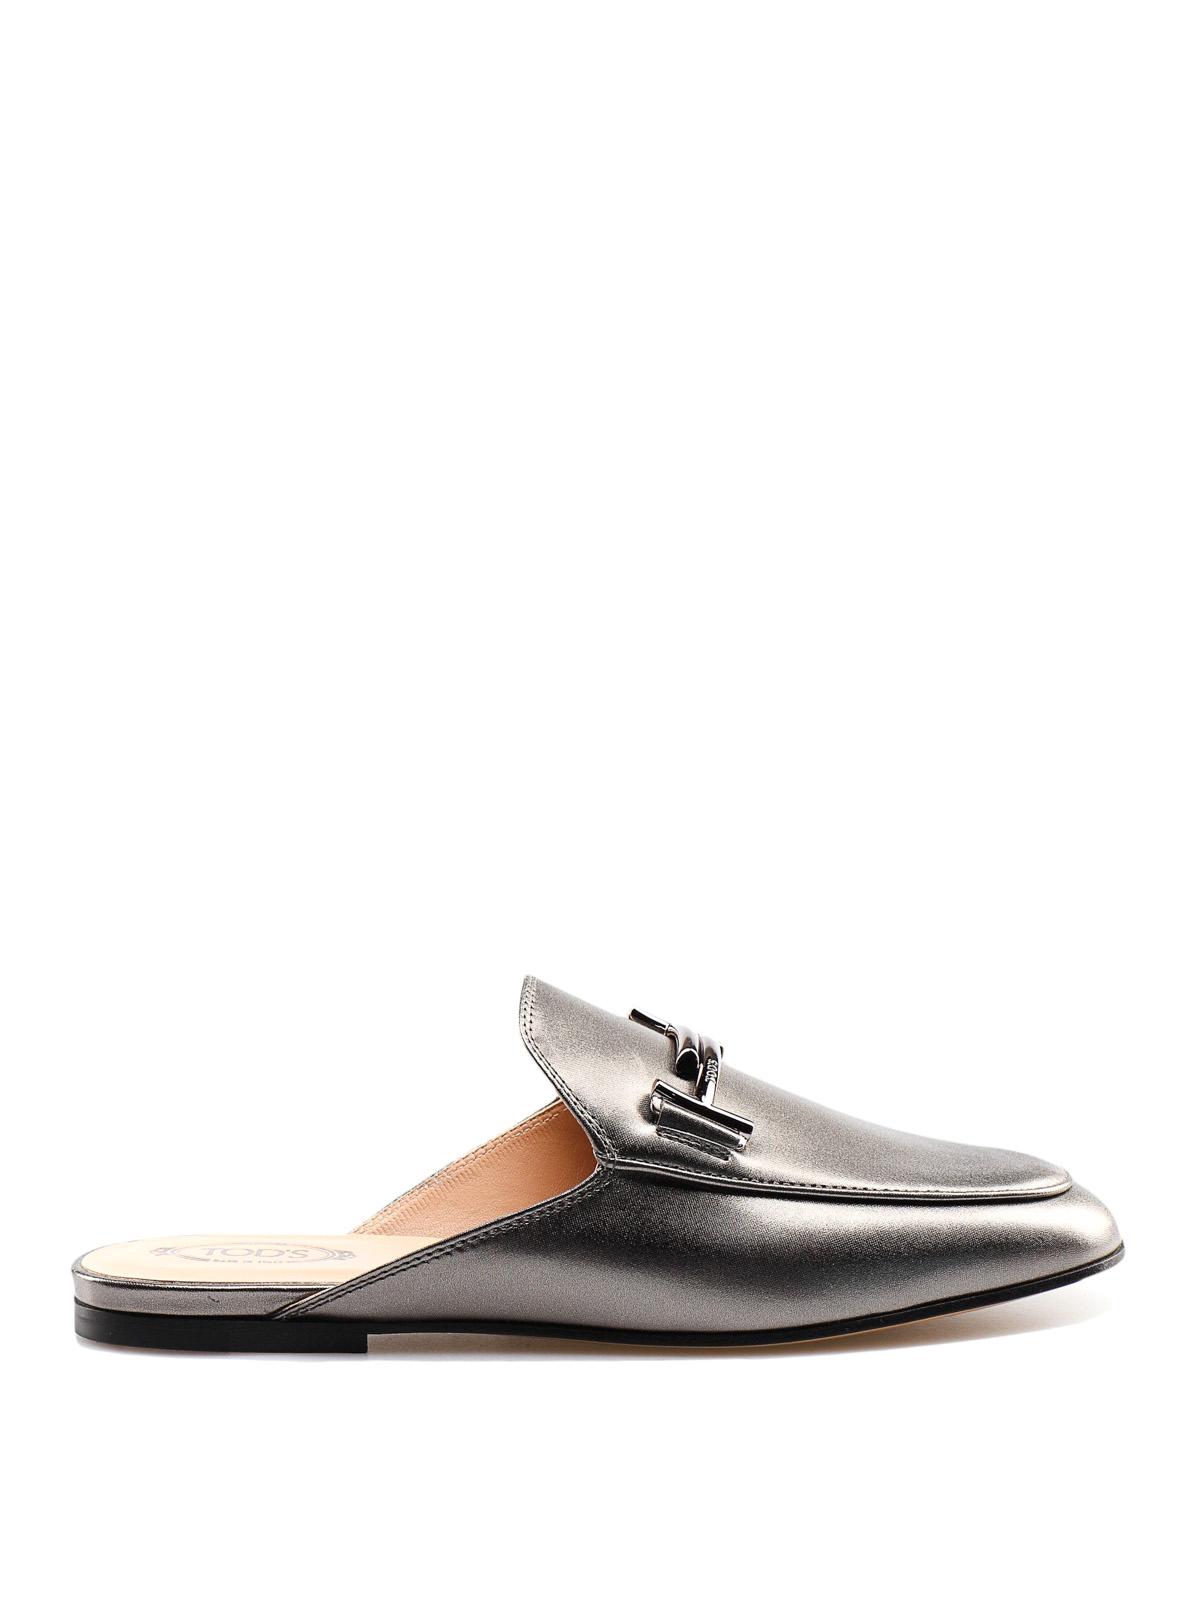 Tod's Double T Metallic Leather Mules - Lyst